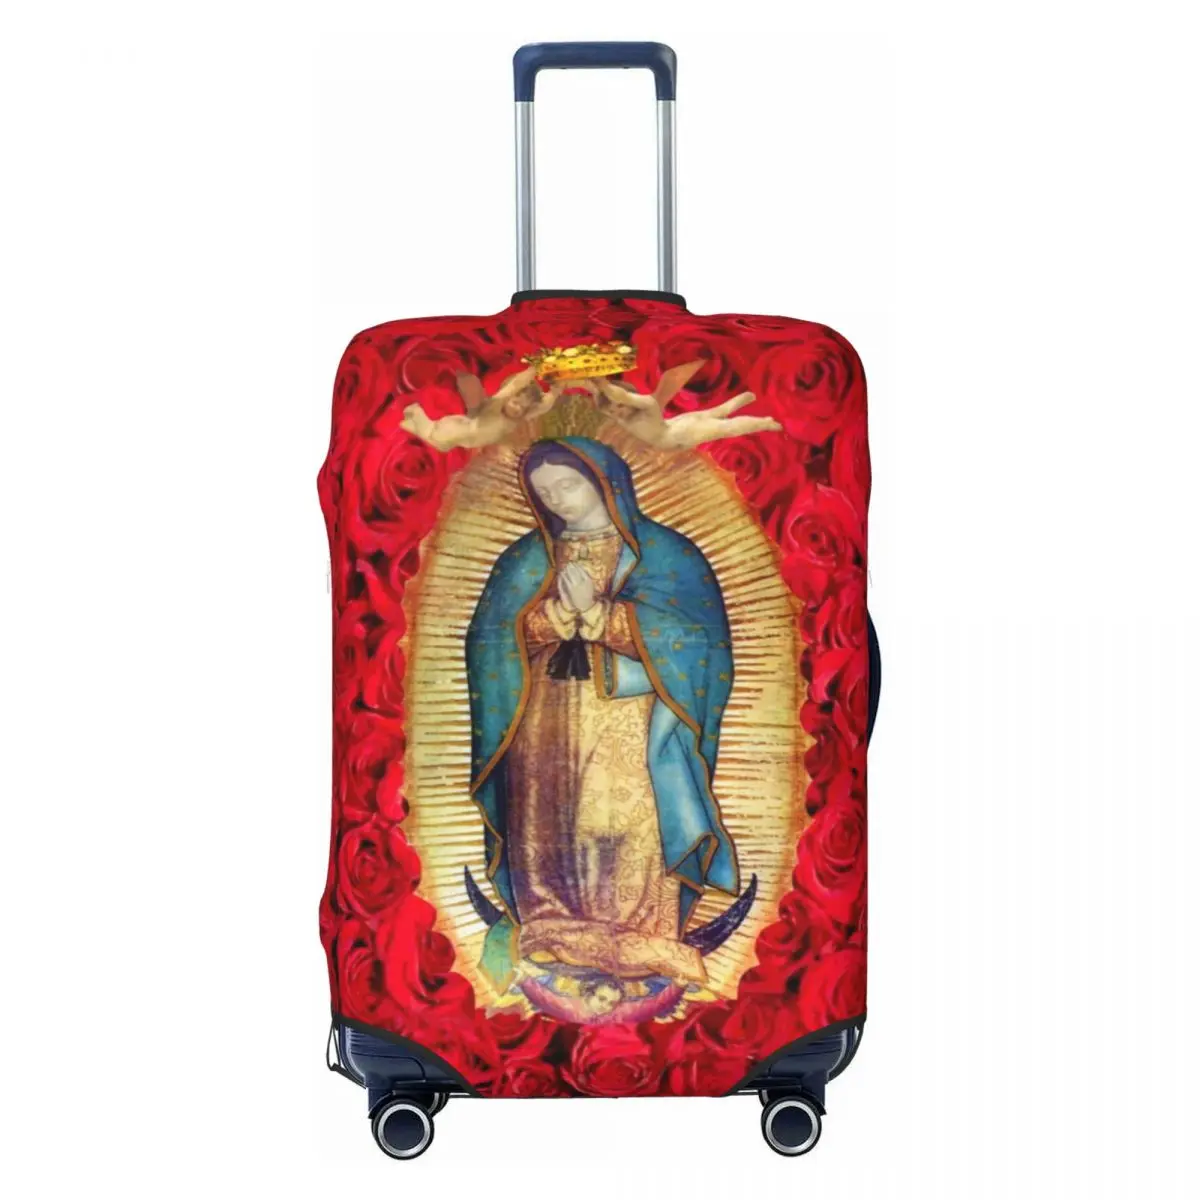 

Custom Guadalupe Virgin Mary With Flowers Luggage Cover Elastic Catholic Travel Suitcase Protective Covers Fits 18-32 Inch